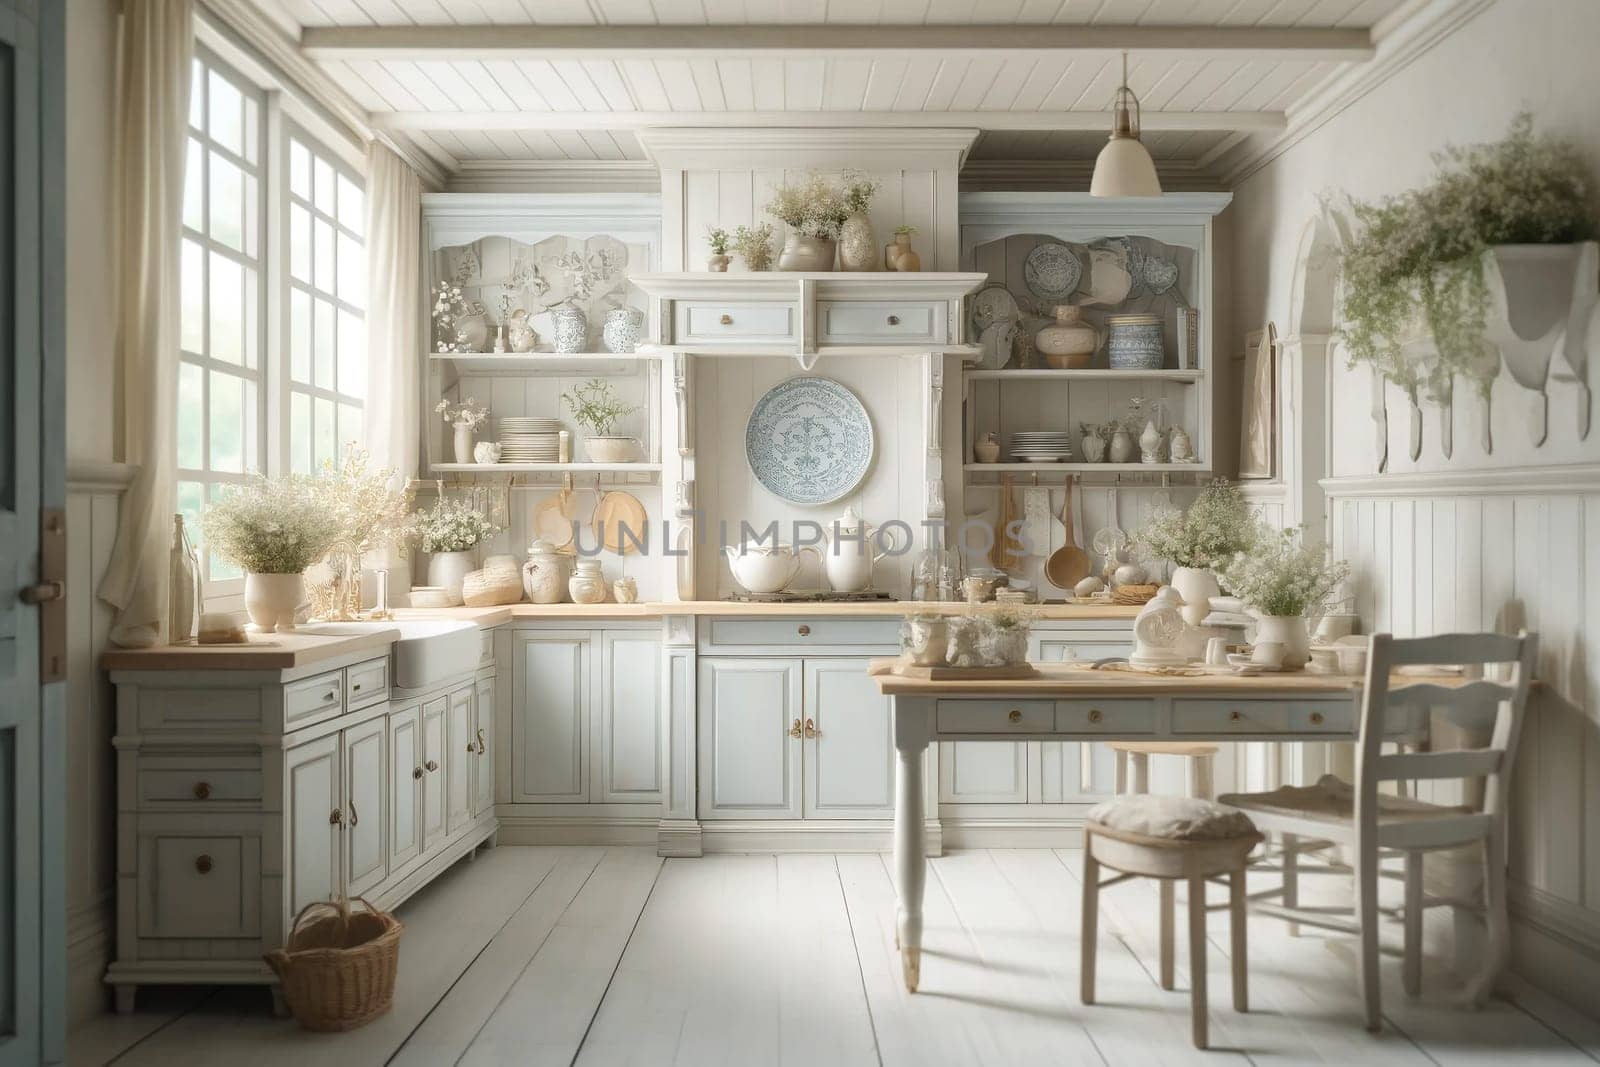 Interior of a white kitchen in Provence style.